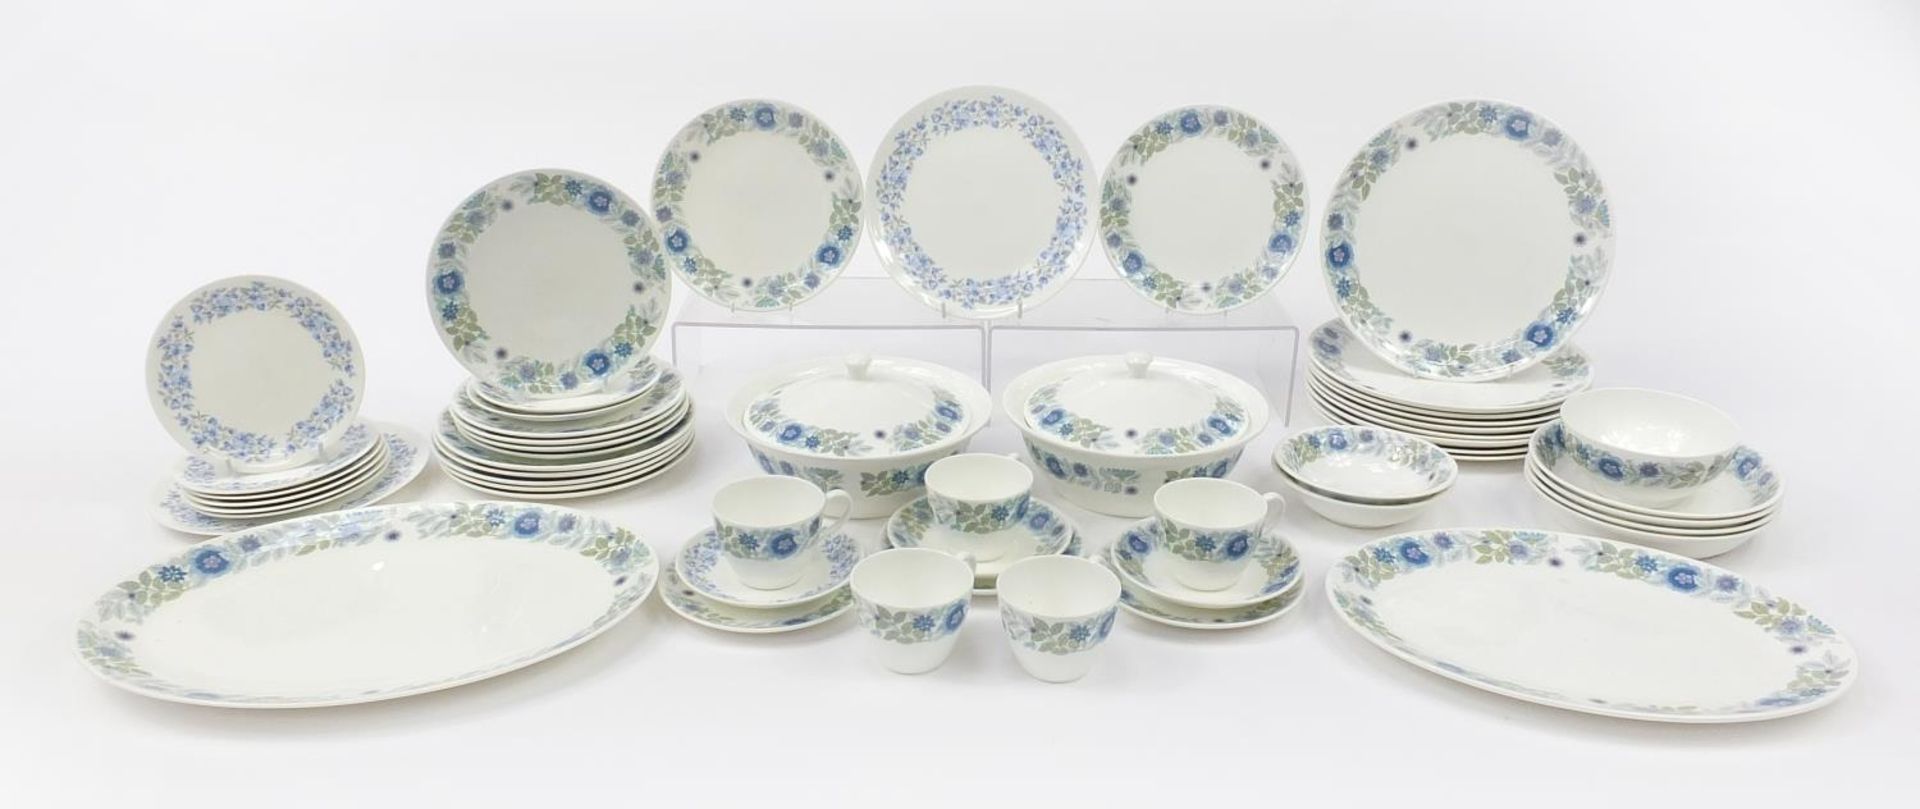 Wedgwood Clementine and Petra dinnerware including lidded tureen, plates and cups, the largest